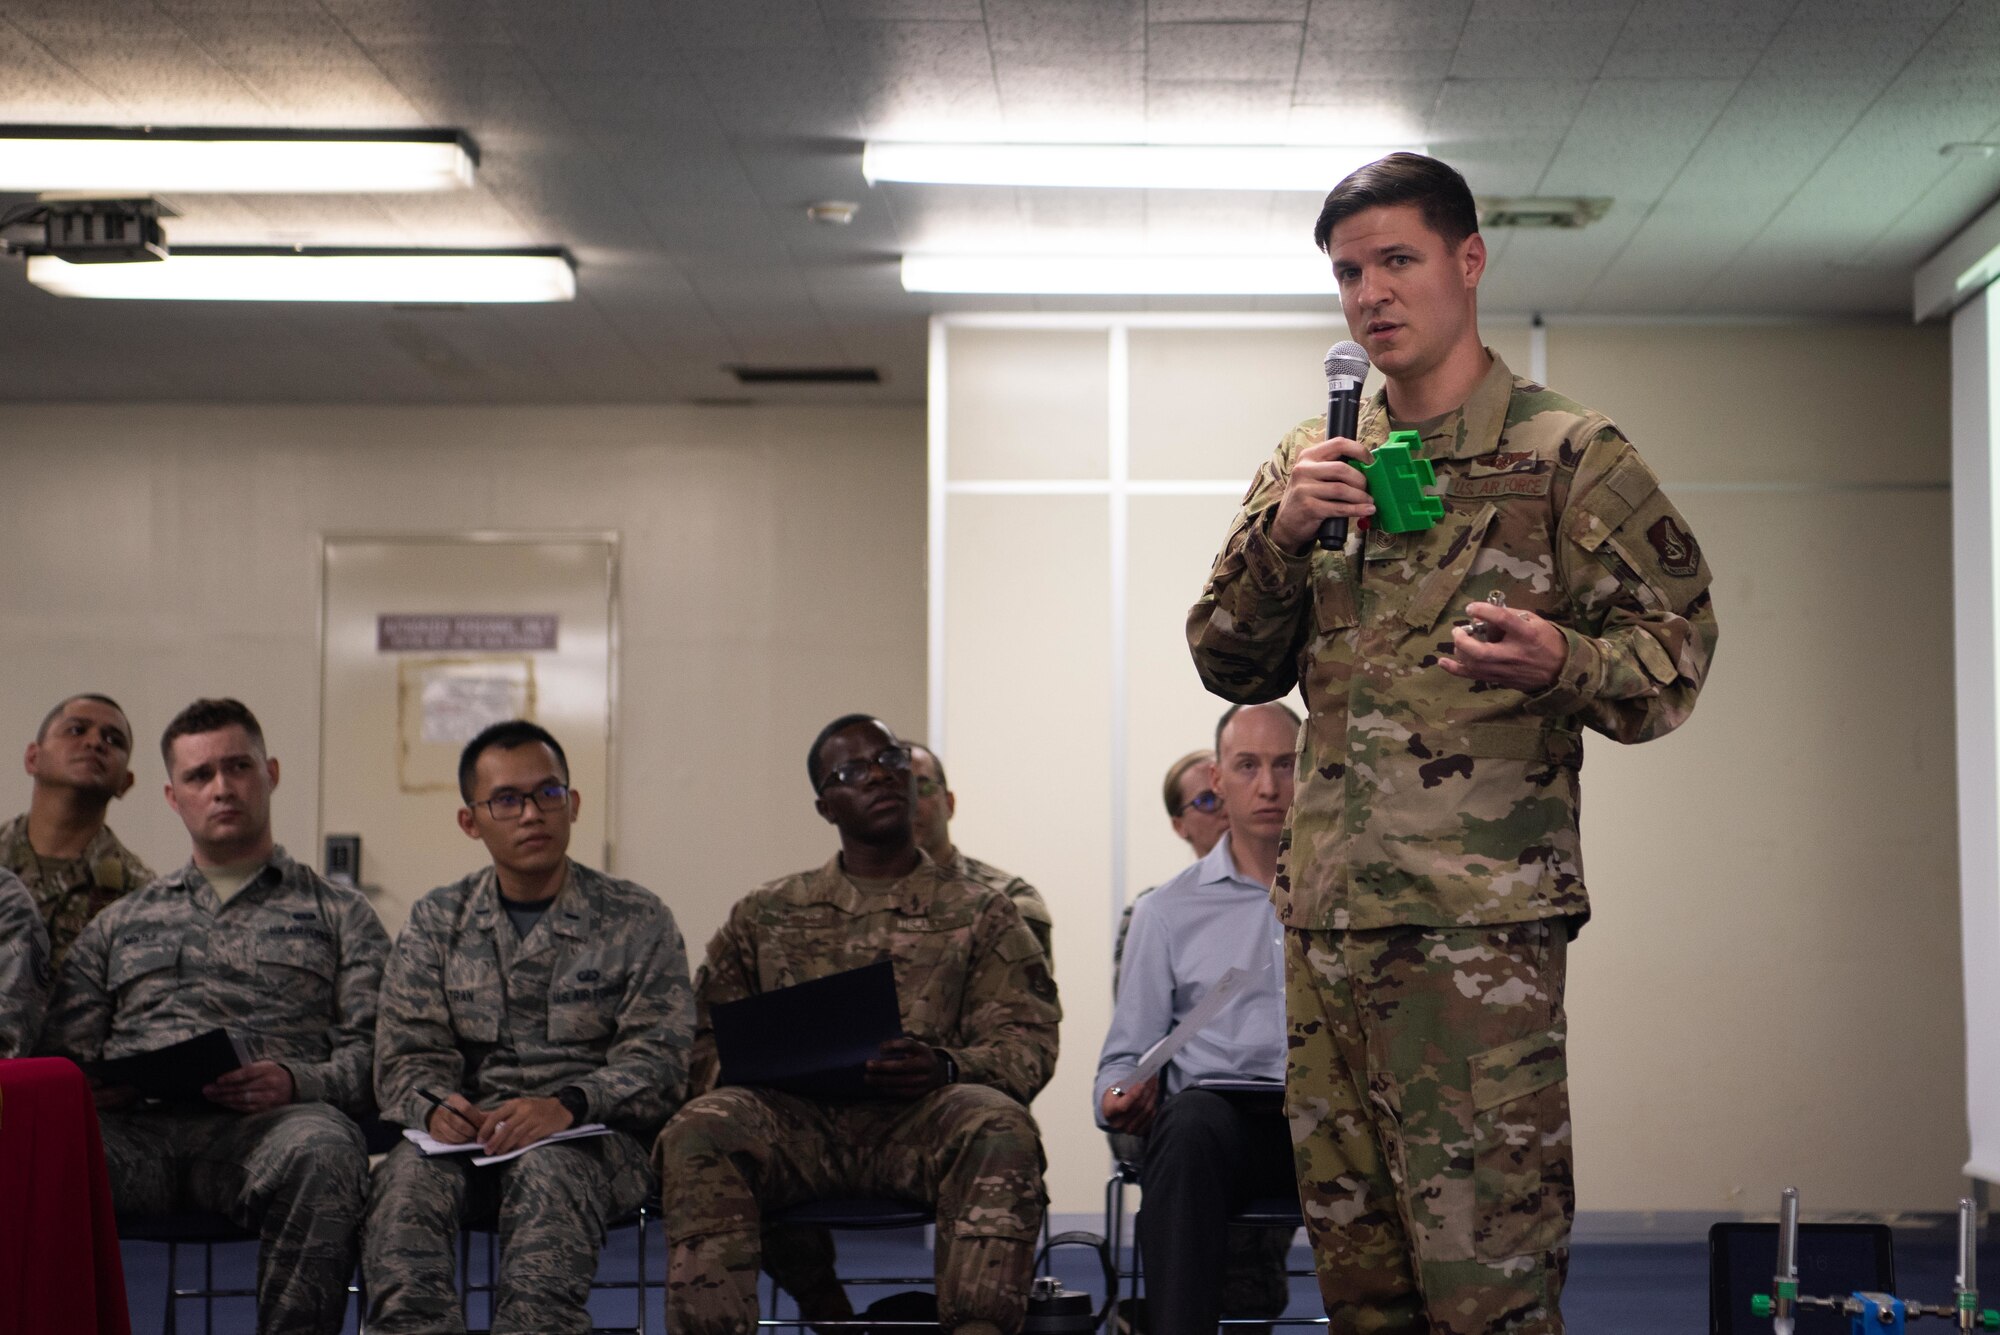 U.S. Air Force Staff Sgt. Dylan King, 18th Aeromedical Evacuation Squadron technician explains the potential innovation to 18th AES mission planning May. 10, 2019, at Kadena Air Base, Japan.